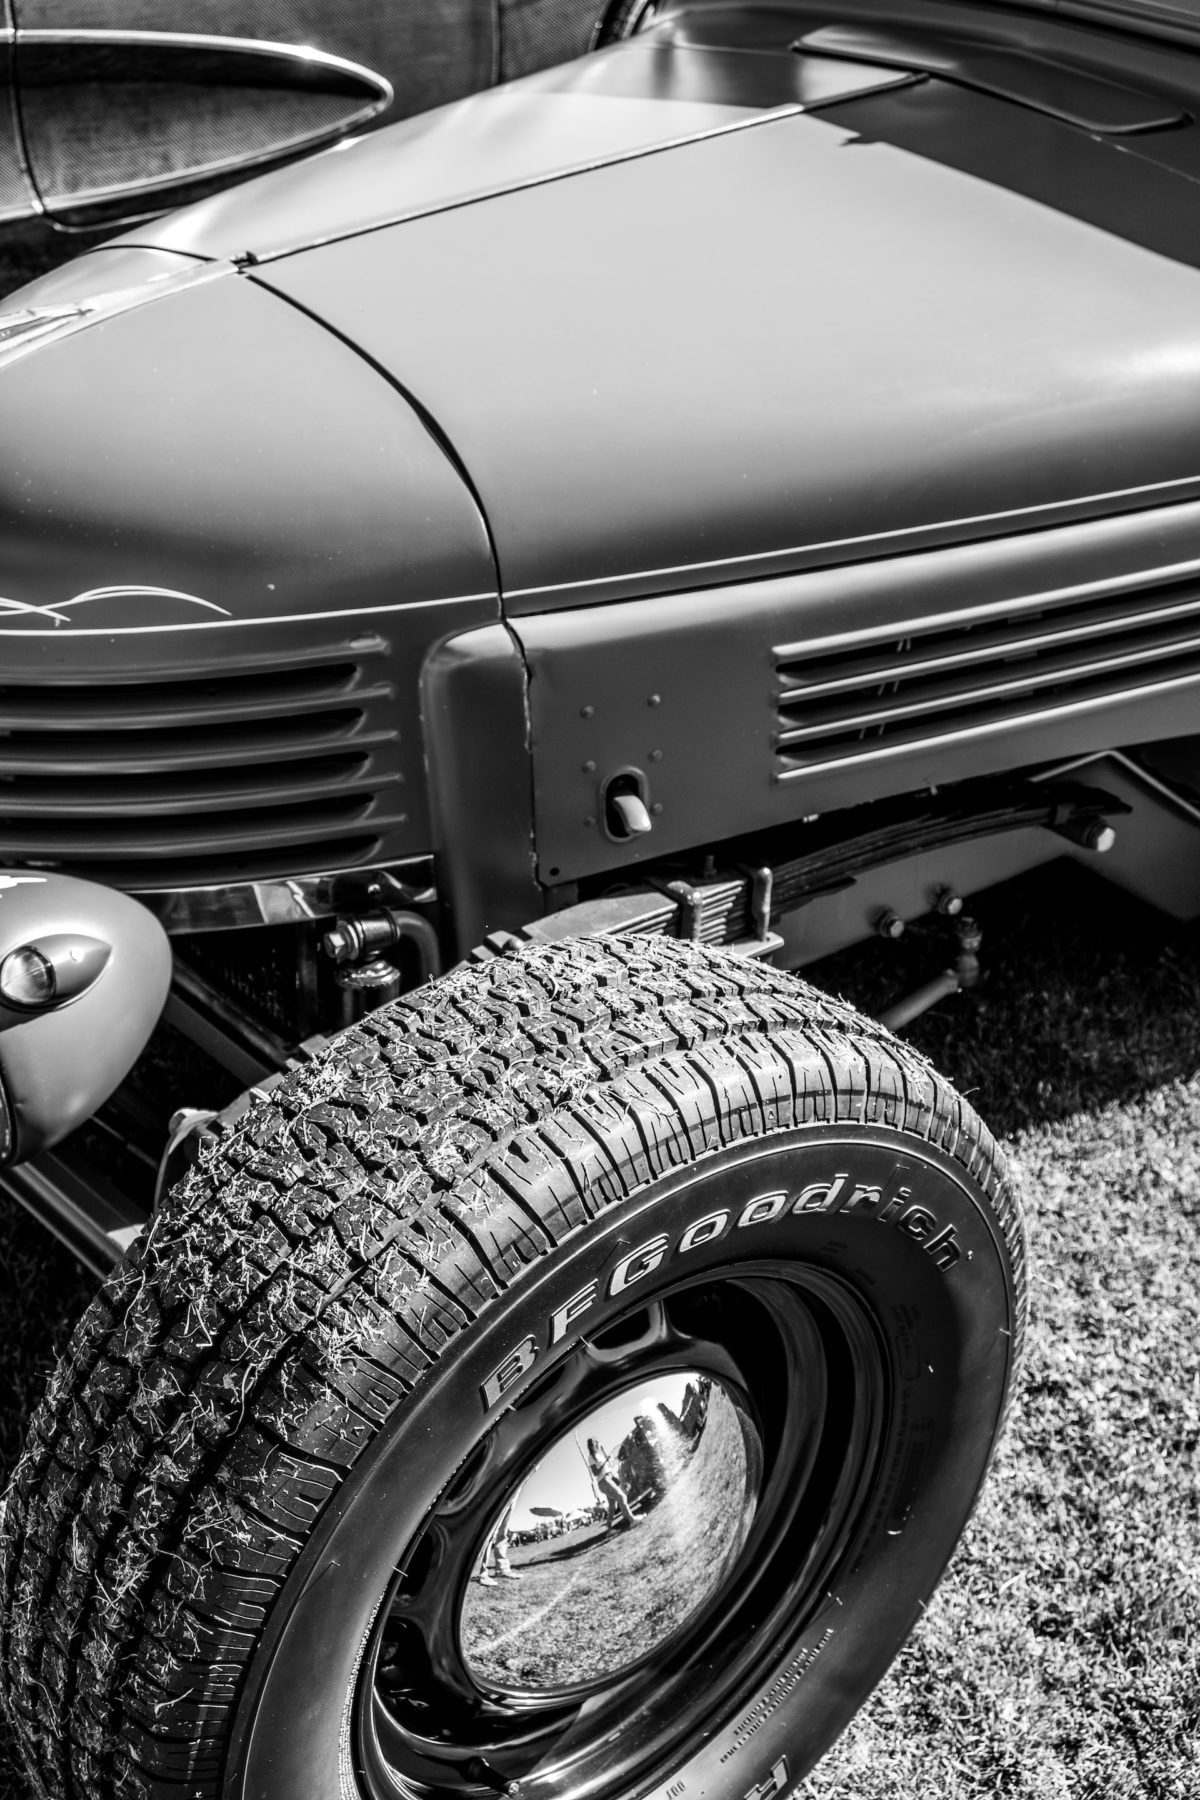 How to Choose the Right Suspension For Your Ratrod